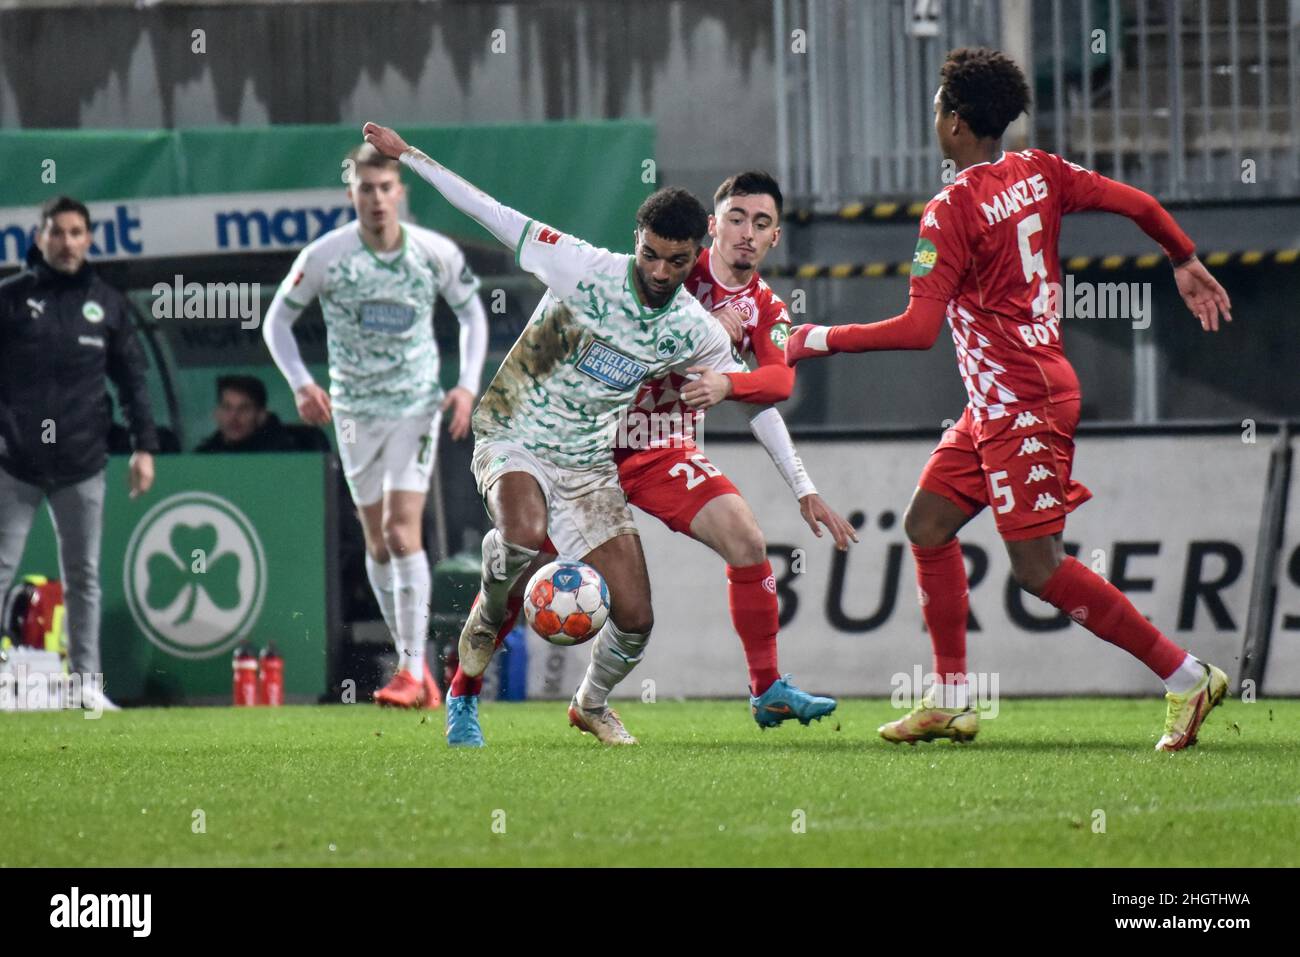 Germany ,Fuerth, Sportpark Ronhof Thomas Sommer - 22 Jan 2022 - Fussball, 1.Bundesliga - SpVgg Greuther Fuerth vs. FSV Mainz 05  Image: (fLTR) Timothy Tillman (SpVgg Greuther Fürth,21), Paul Nebel (Mainz, 26)  DFL regulations prohibit any use of photographs as image sequences and or quasi-video Stock Photo